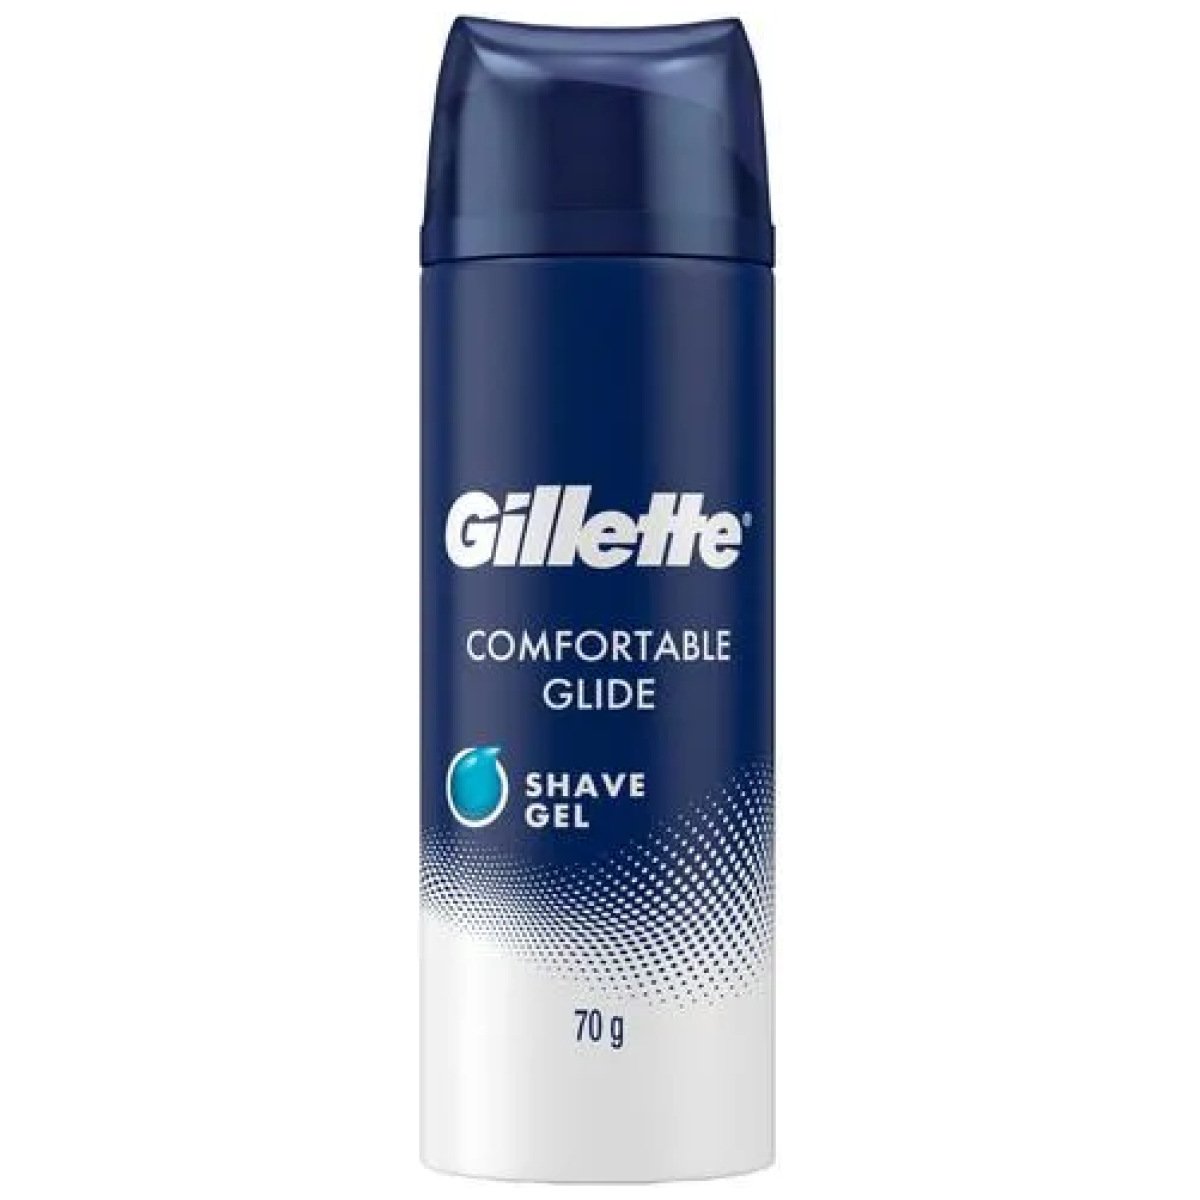 Gillette Comfortable Glide Shave Gel - Soothes & Hydrates The Skin, 70 g